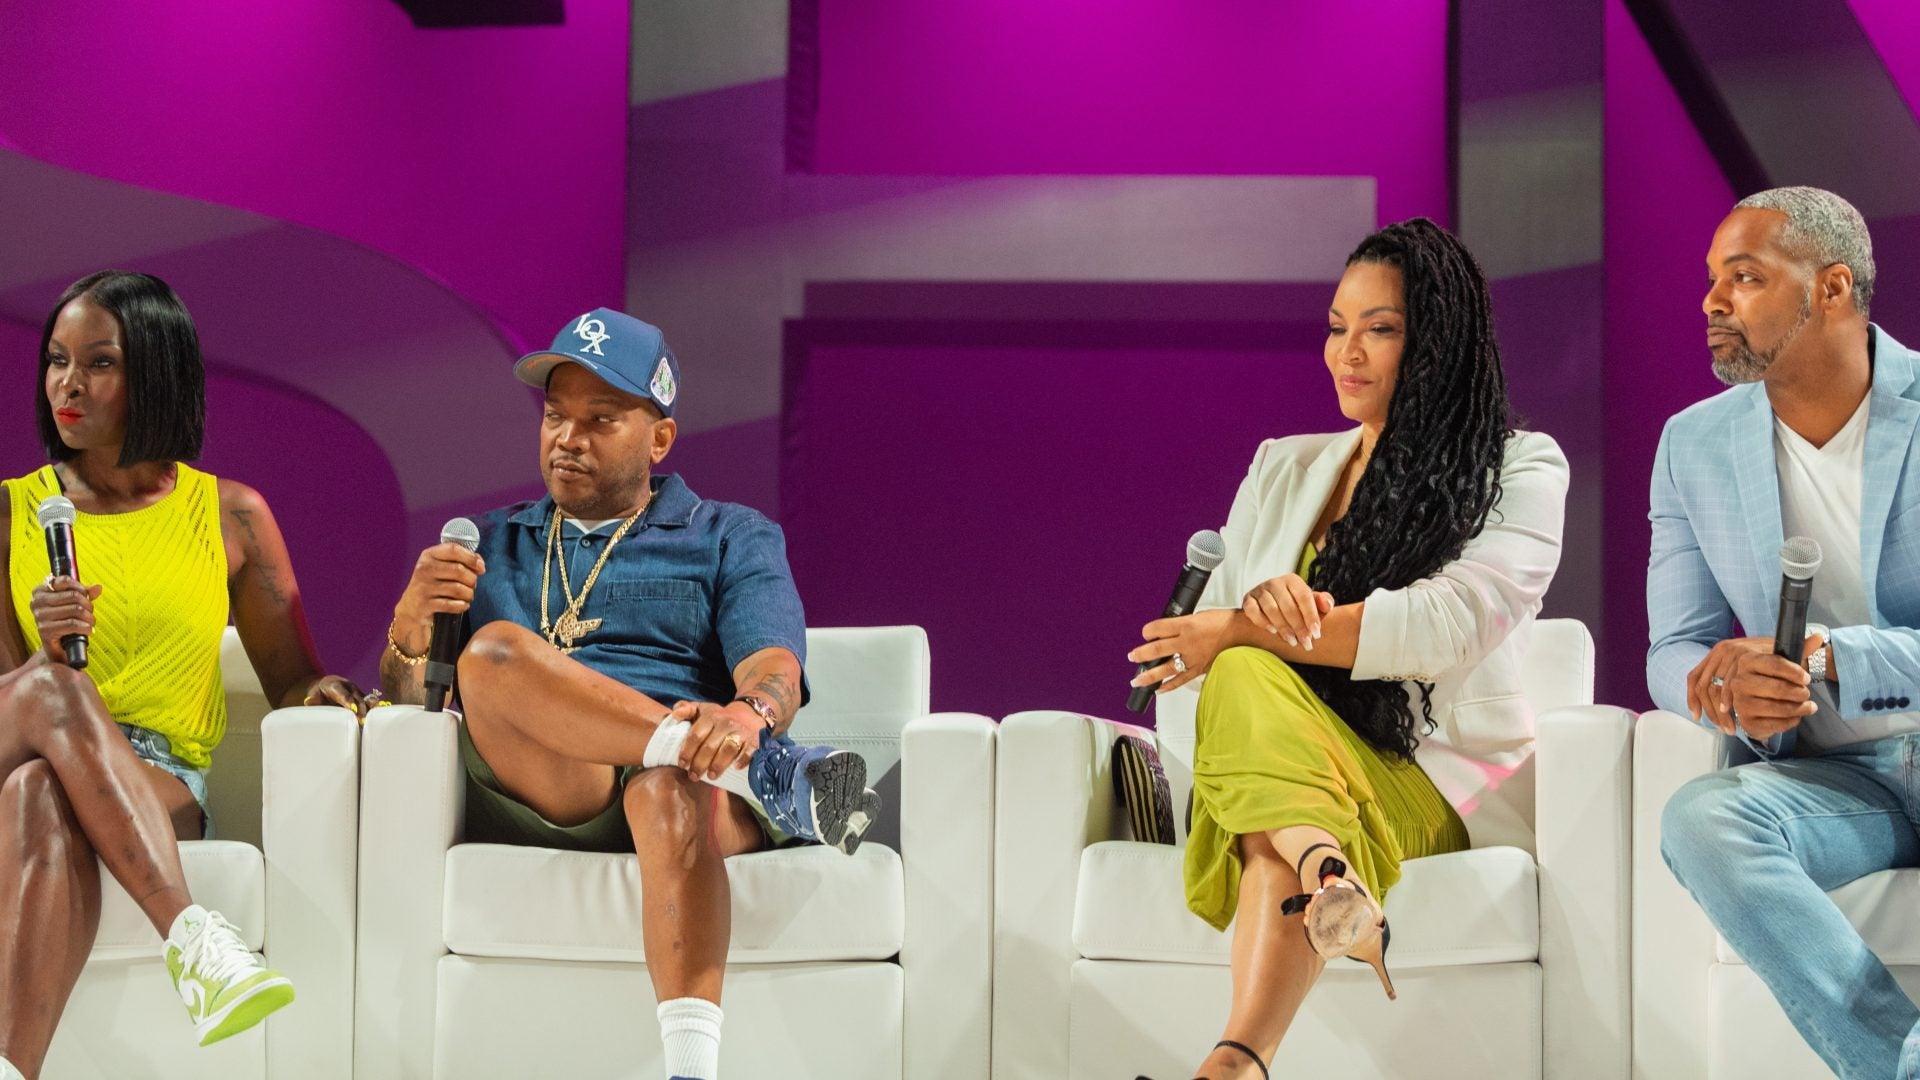 EFOC: Styles P Reflects On Why His Marriage Is So Successful: ‘My Wife Compliments All My Weaknesses’